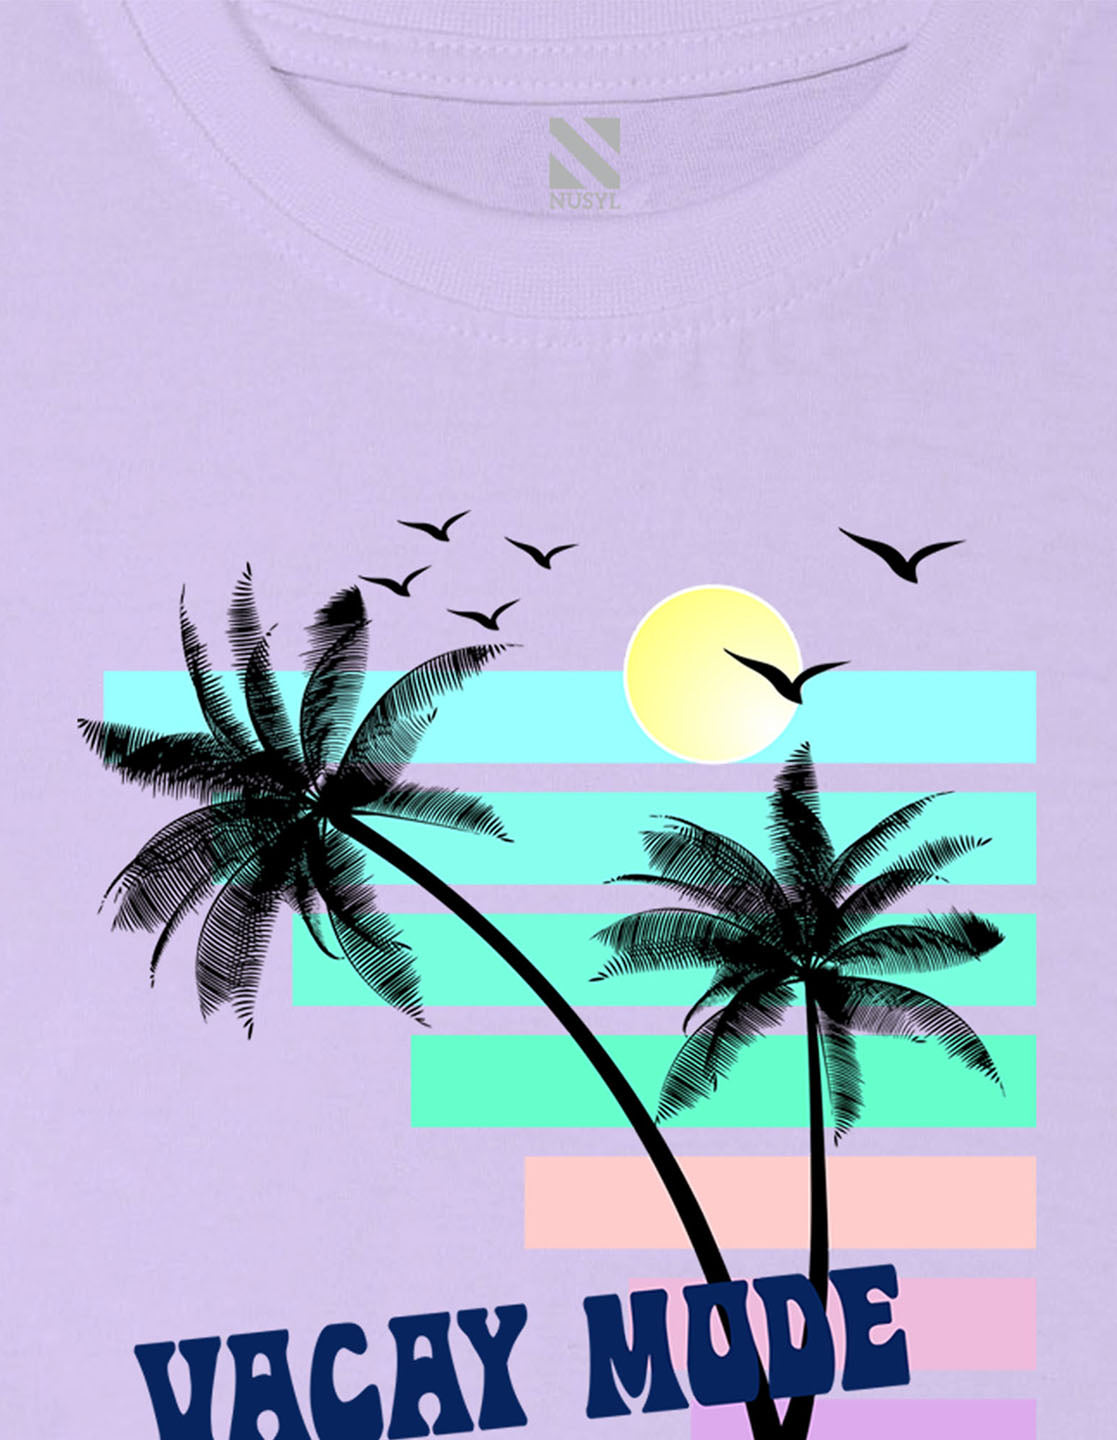 Nusyl Vacay mode Printed Lilac Colour T-shirts